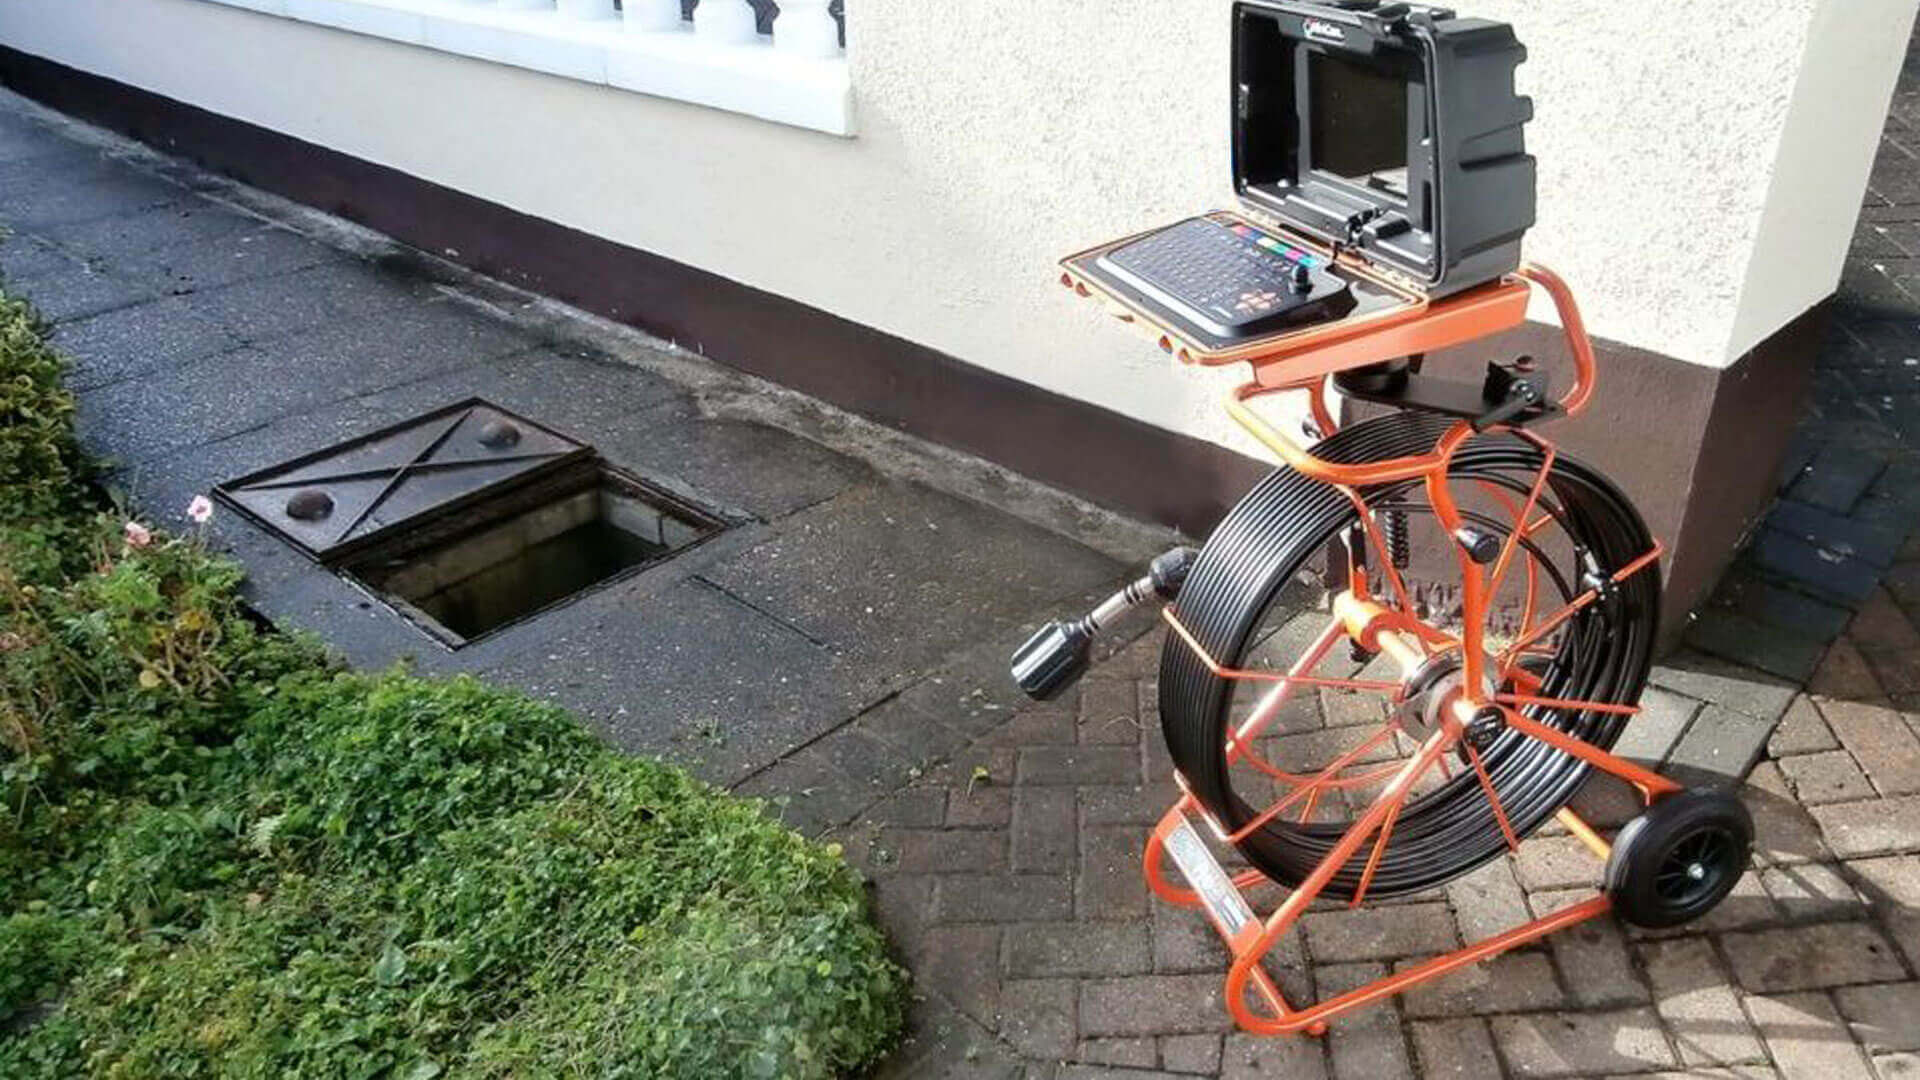 Sewer Inspection Camera With Locator